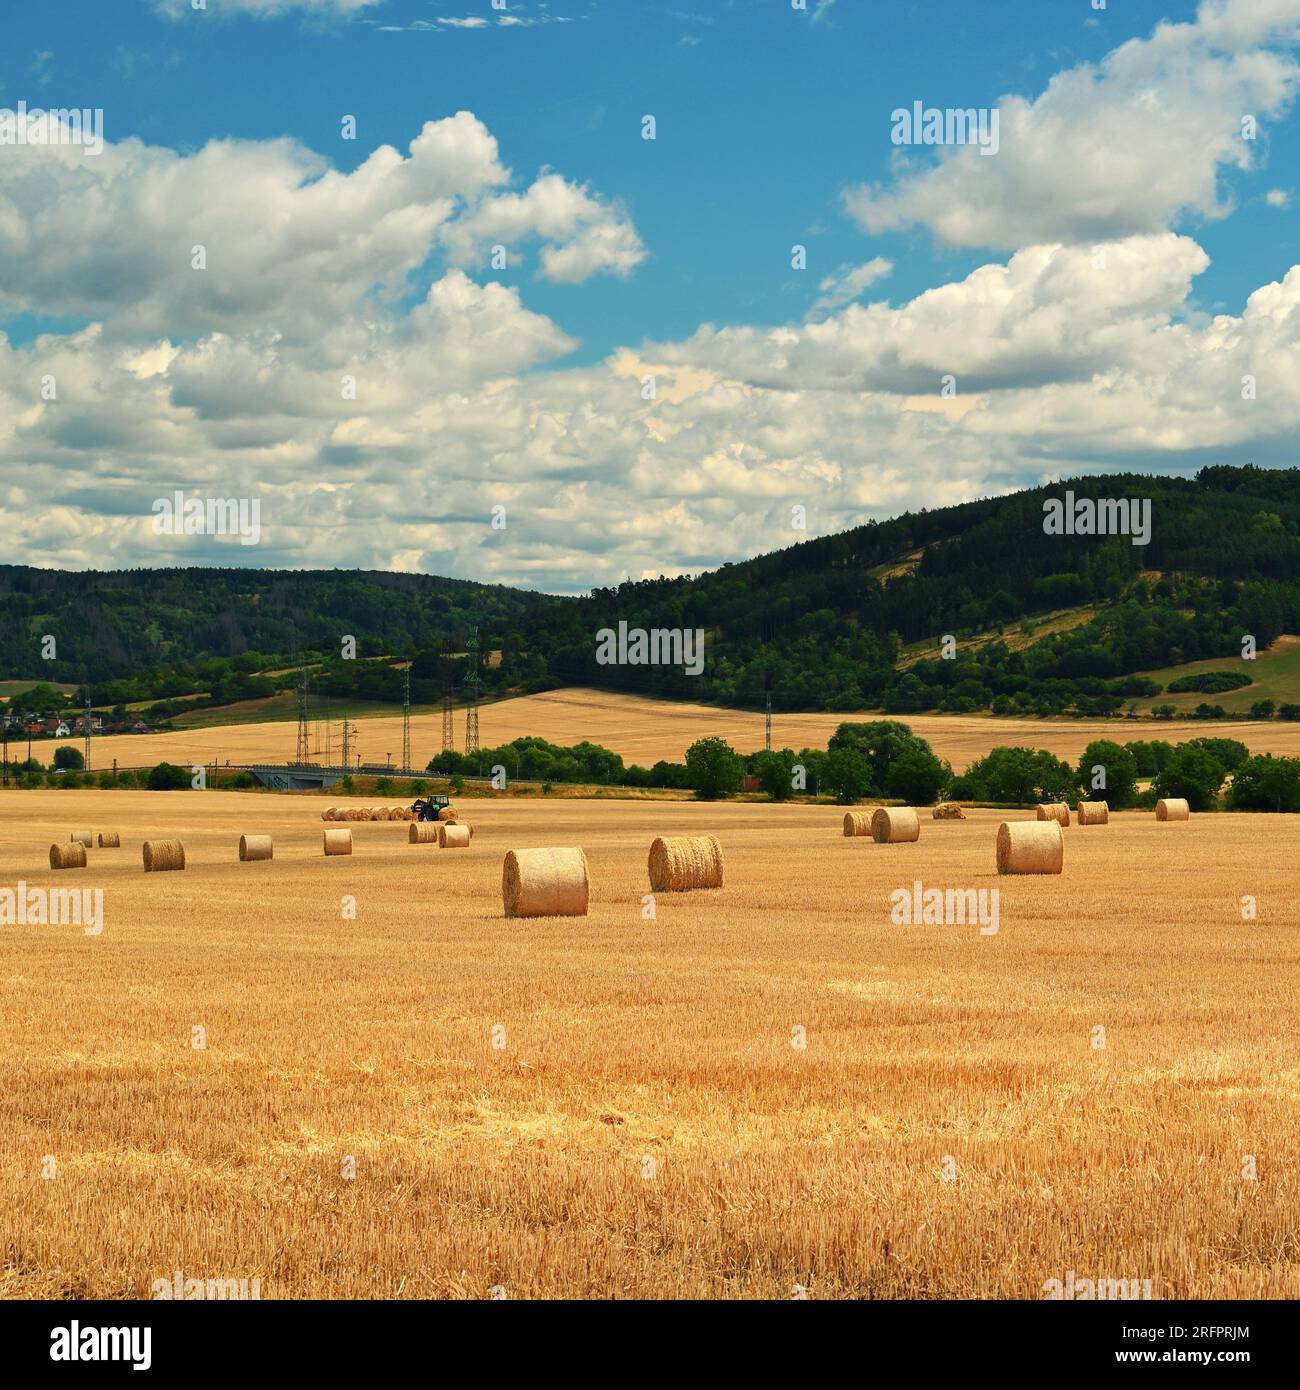 Beautiful countryside landscape. Hay bales in harvested fields. Stock Photo